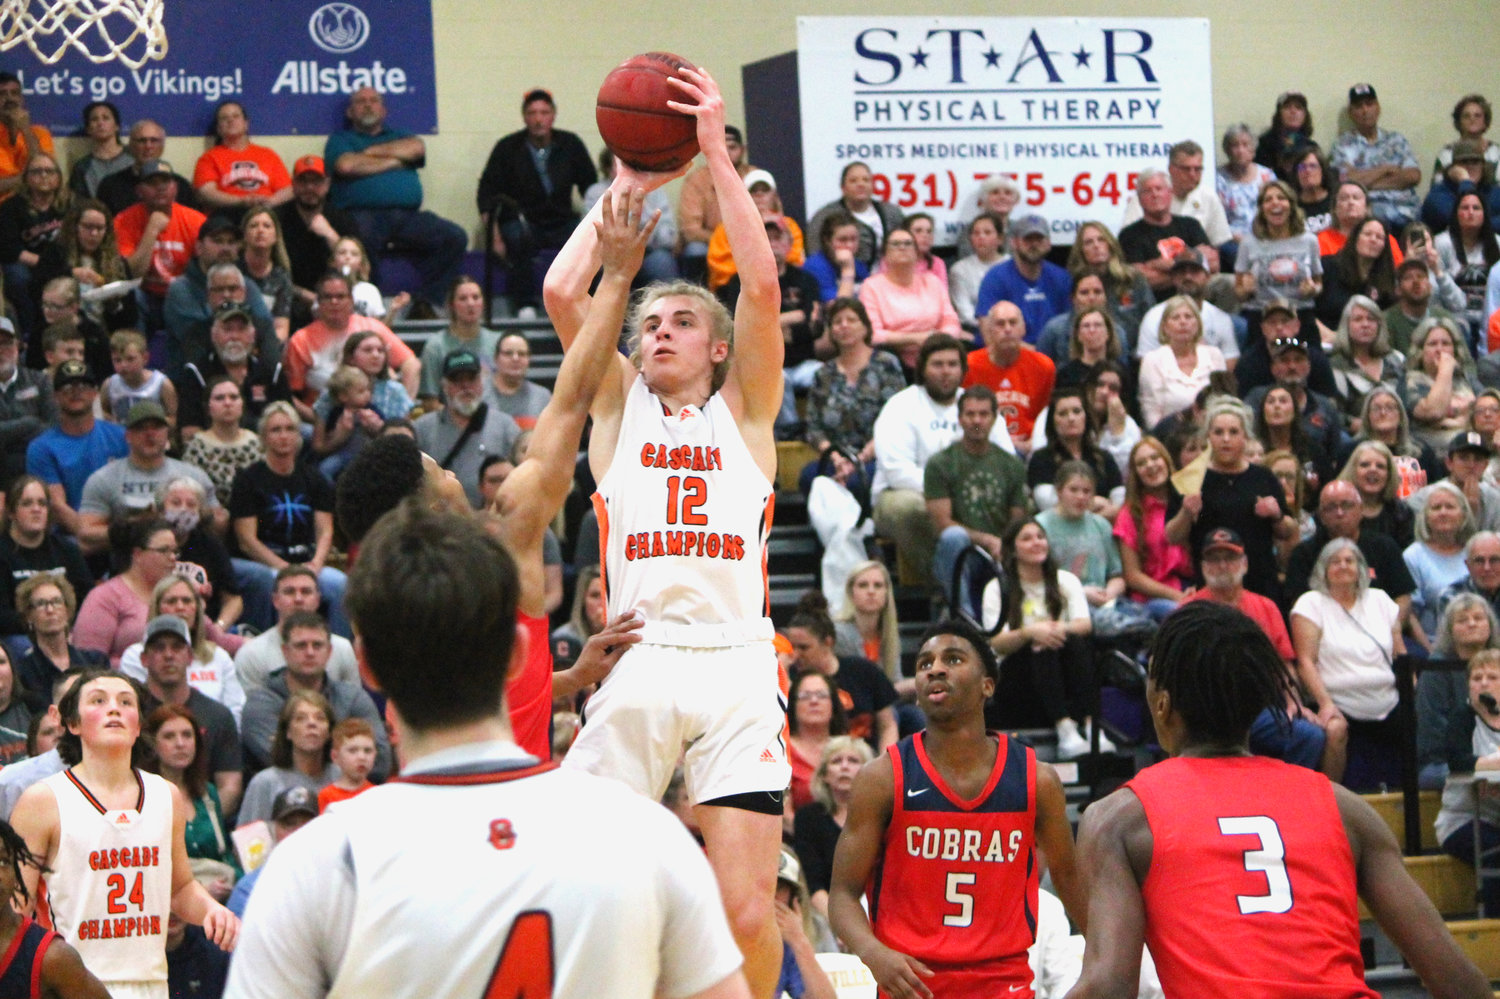 Lucas Clanton rises up and knocks down a mid range jump shot against Whites Creek. He notched 12 points on the night. 